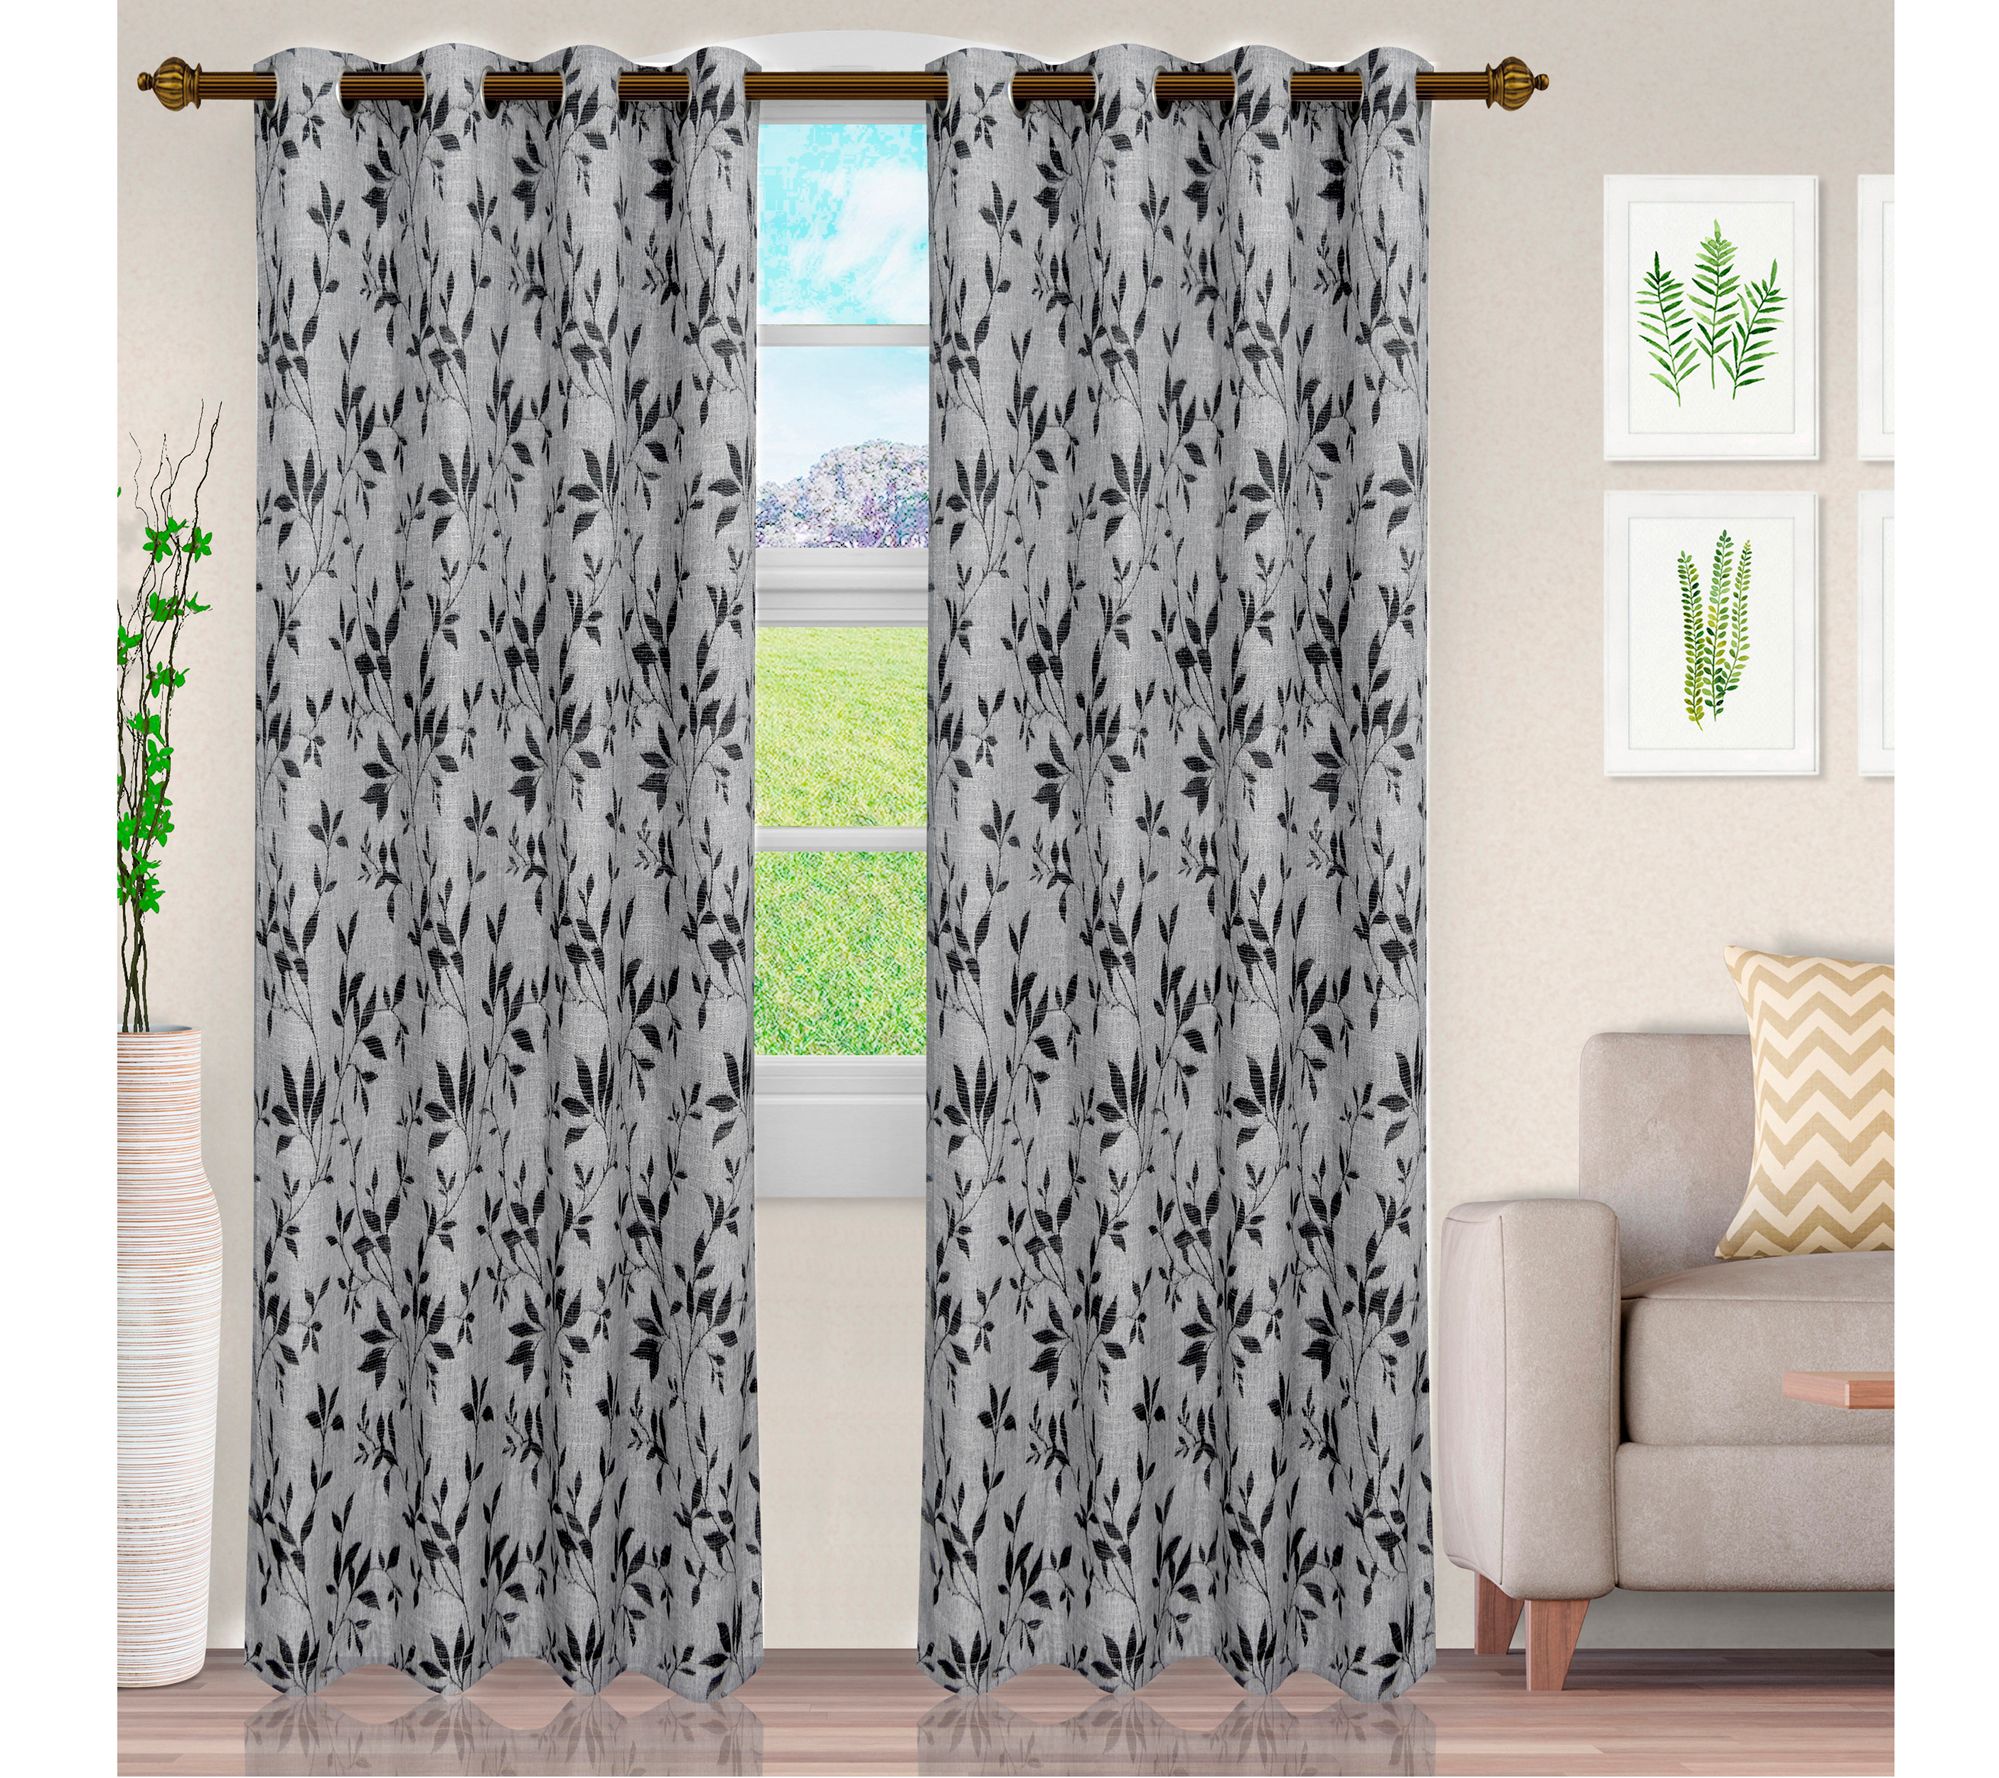 Set of Two McKenzie Blackout Thermal Insulated Top Grommet Window Curtain Panels 